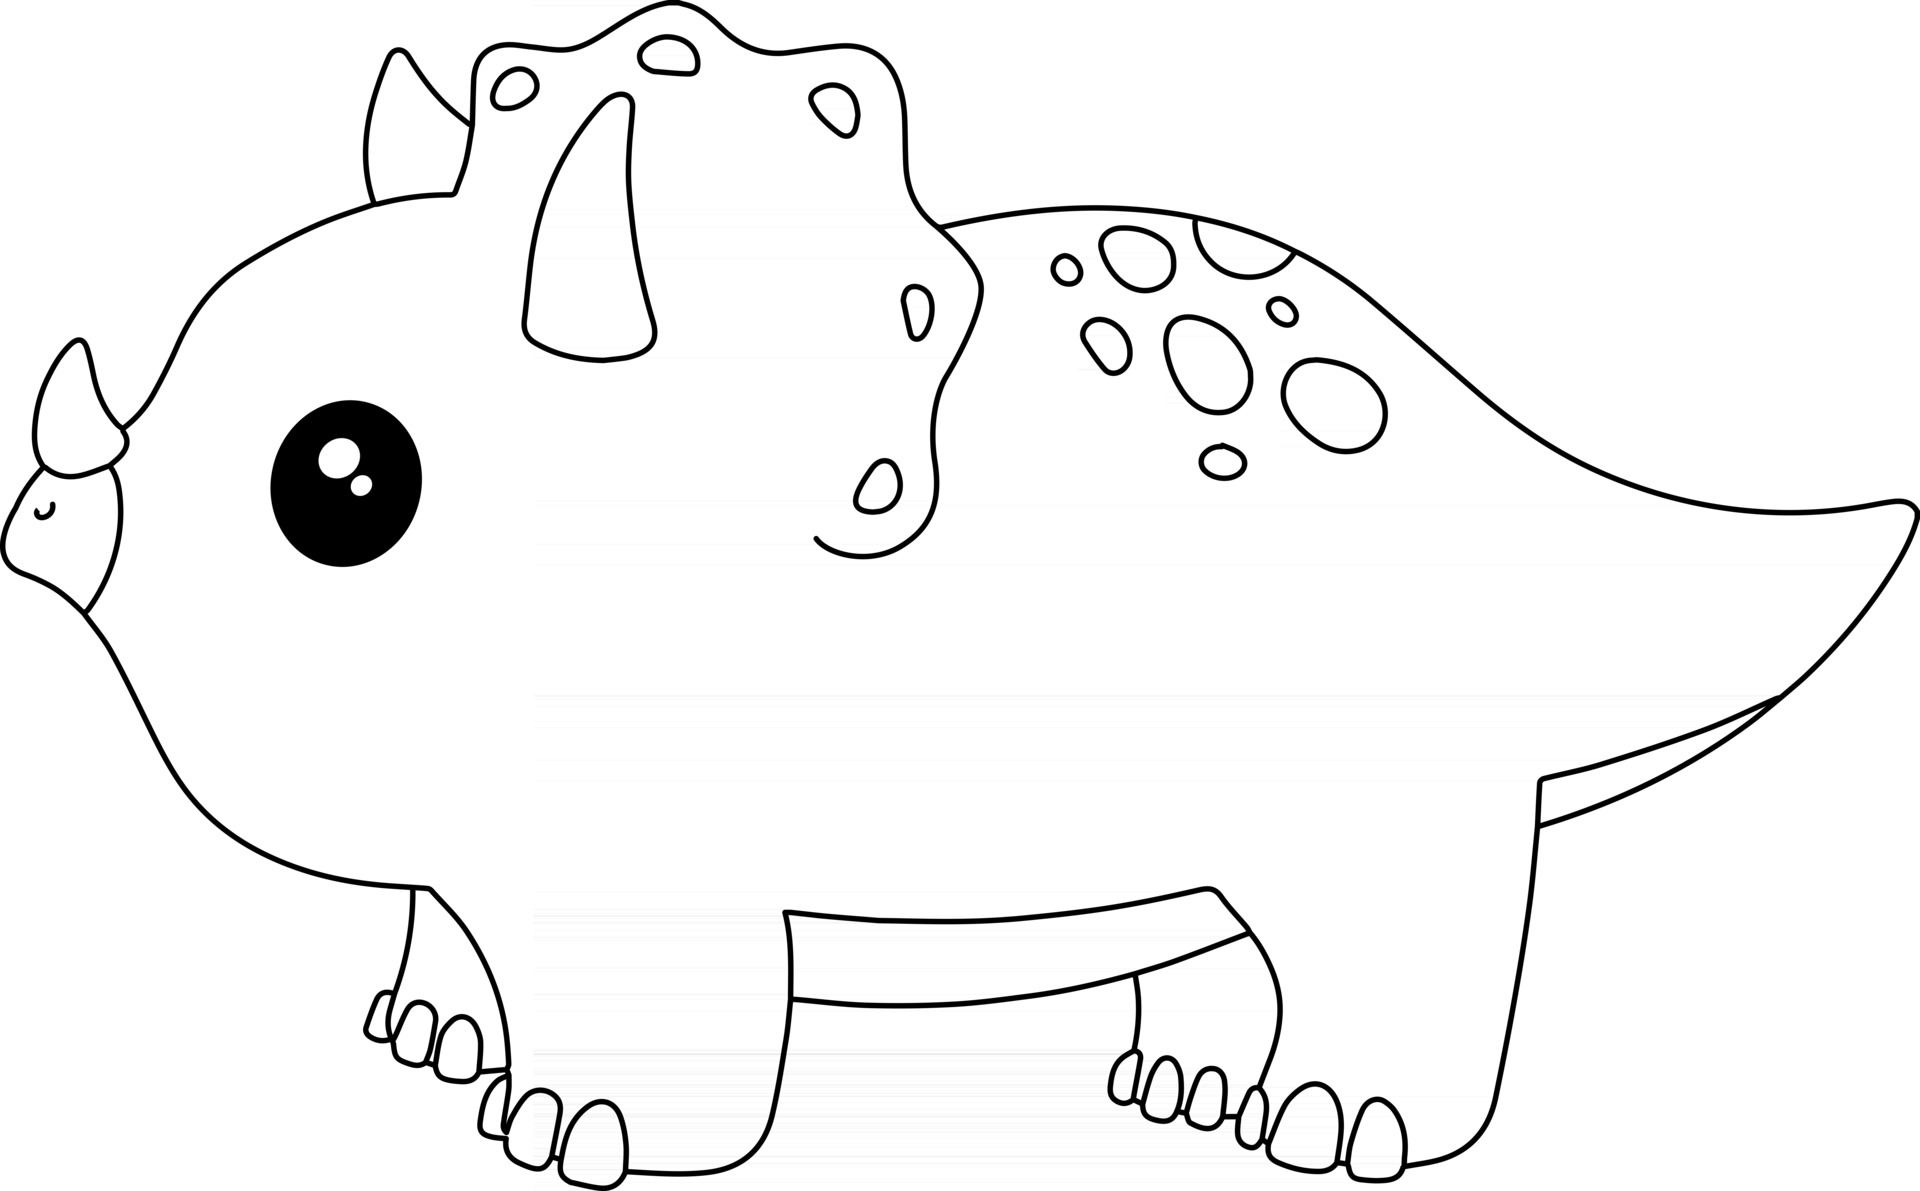 Dinosaur Coloring Pages Vector Art, Icons, and Graphics for Free ...